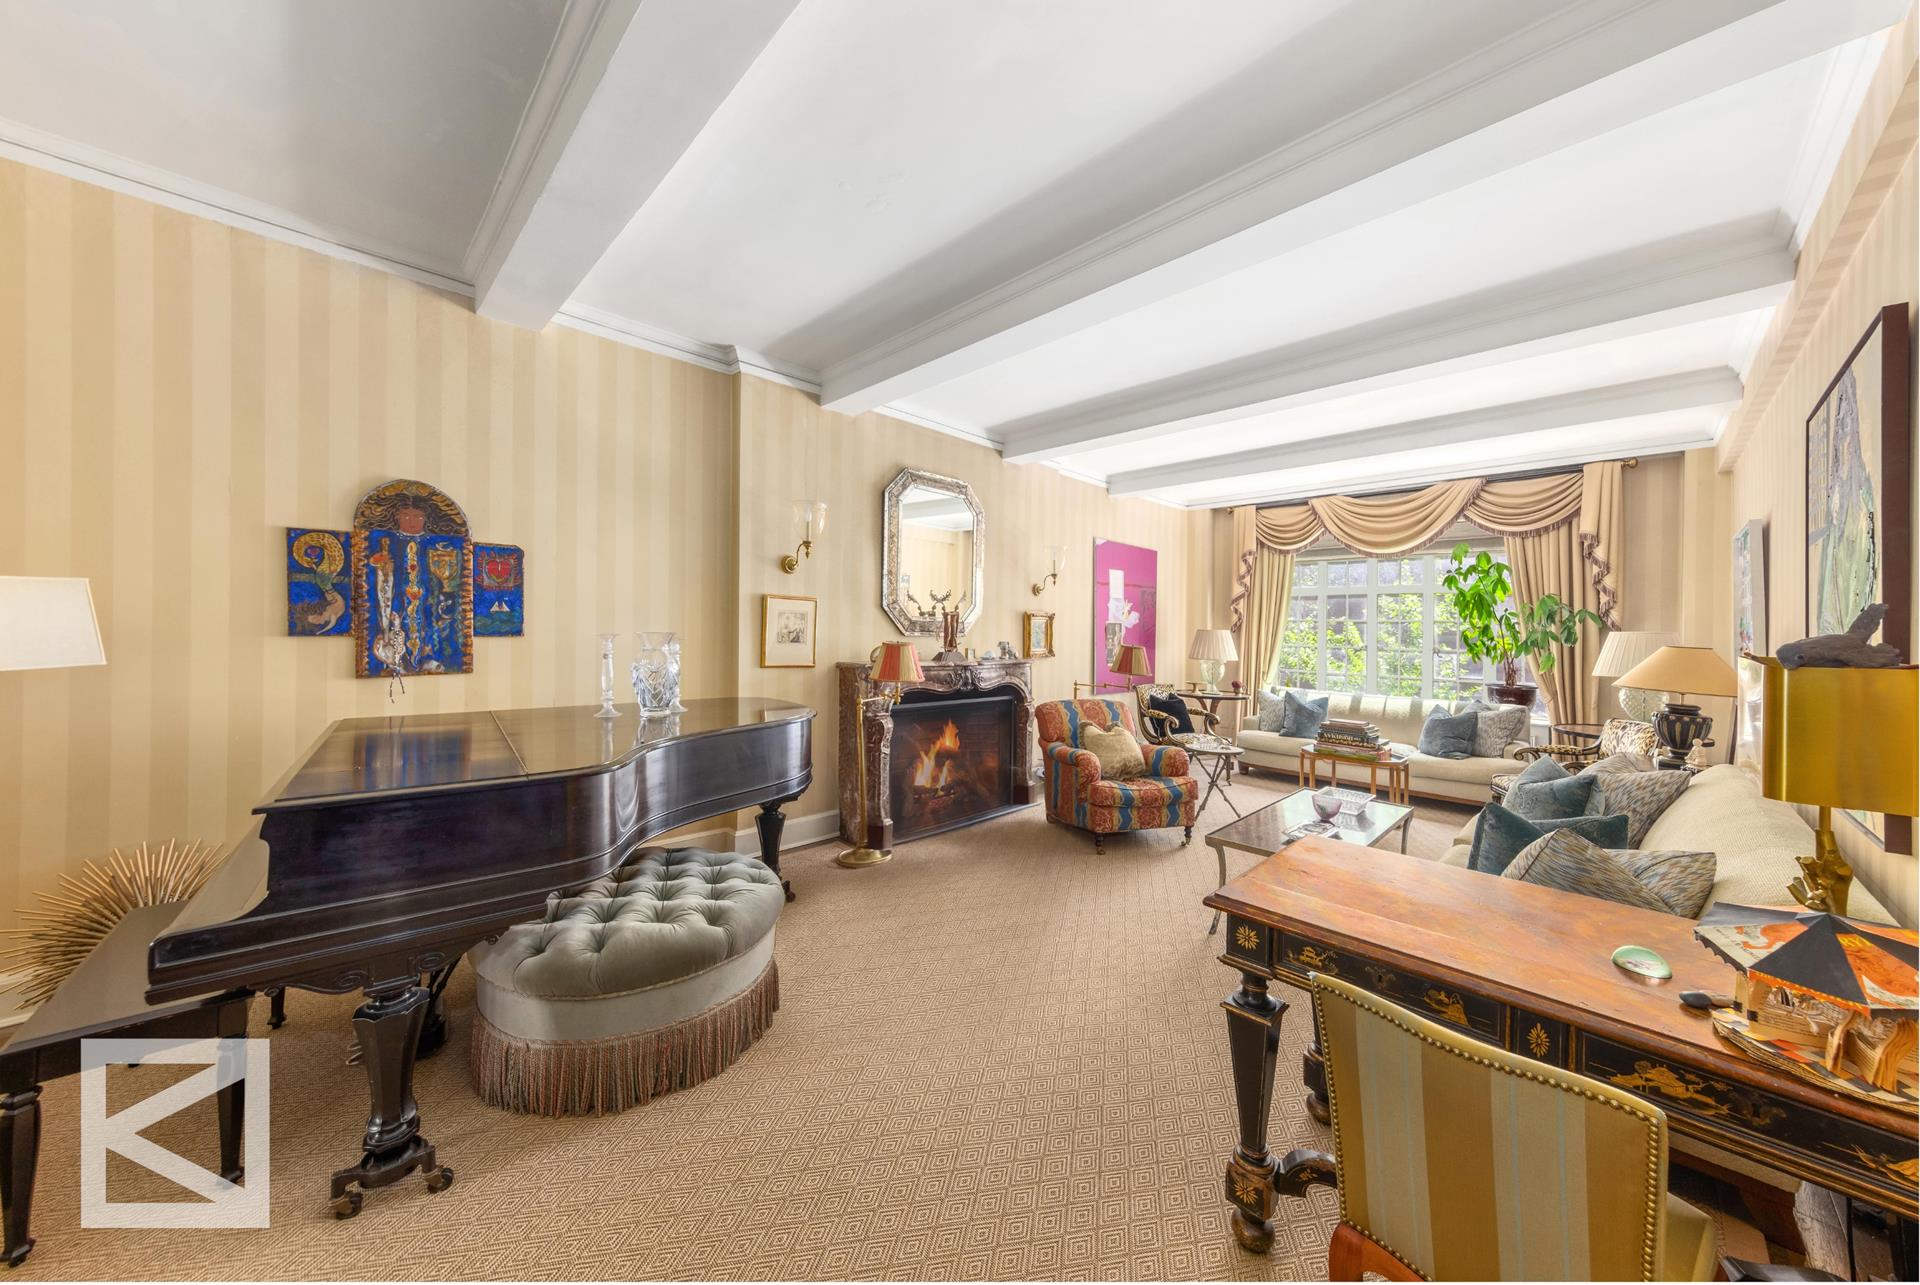 115 East 67th Street 3/4D, Lenox Hill, Upper East Side, NYC - 5 Bedrooms  
5 Bathrooms  
8 Rooms - 